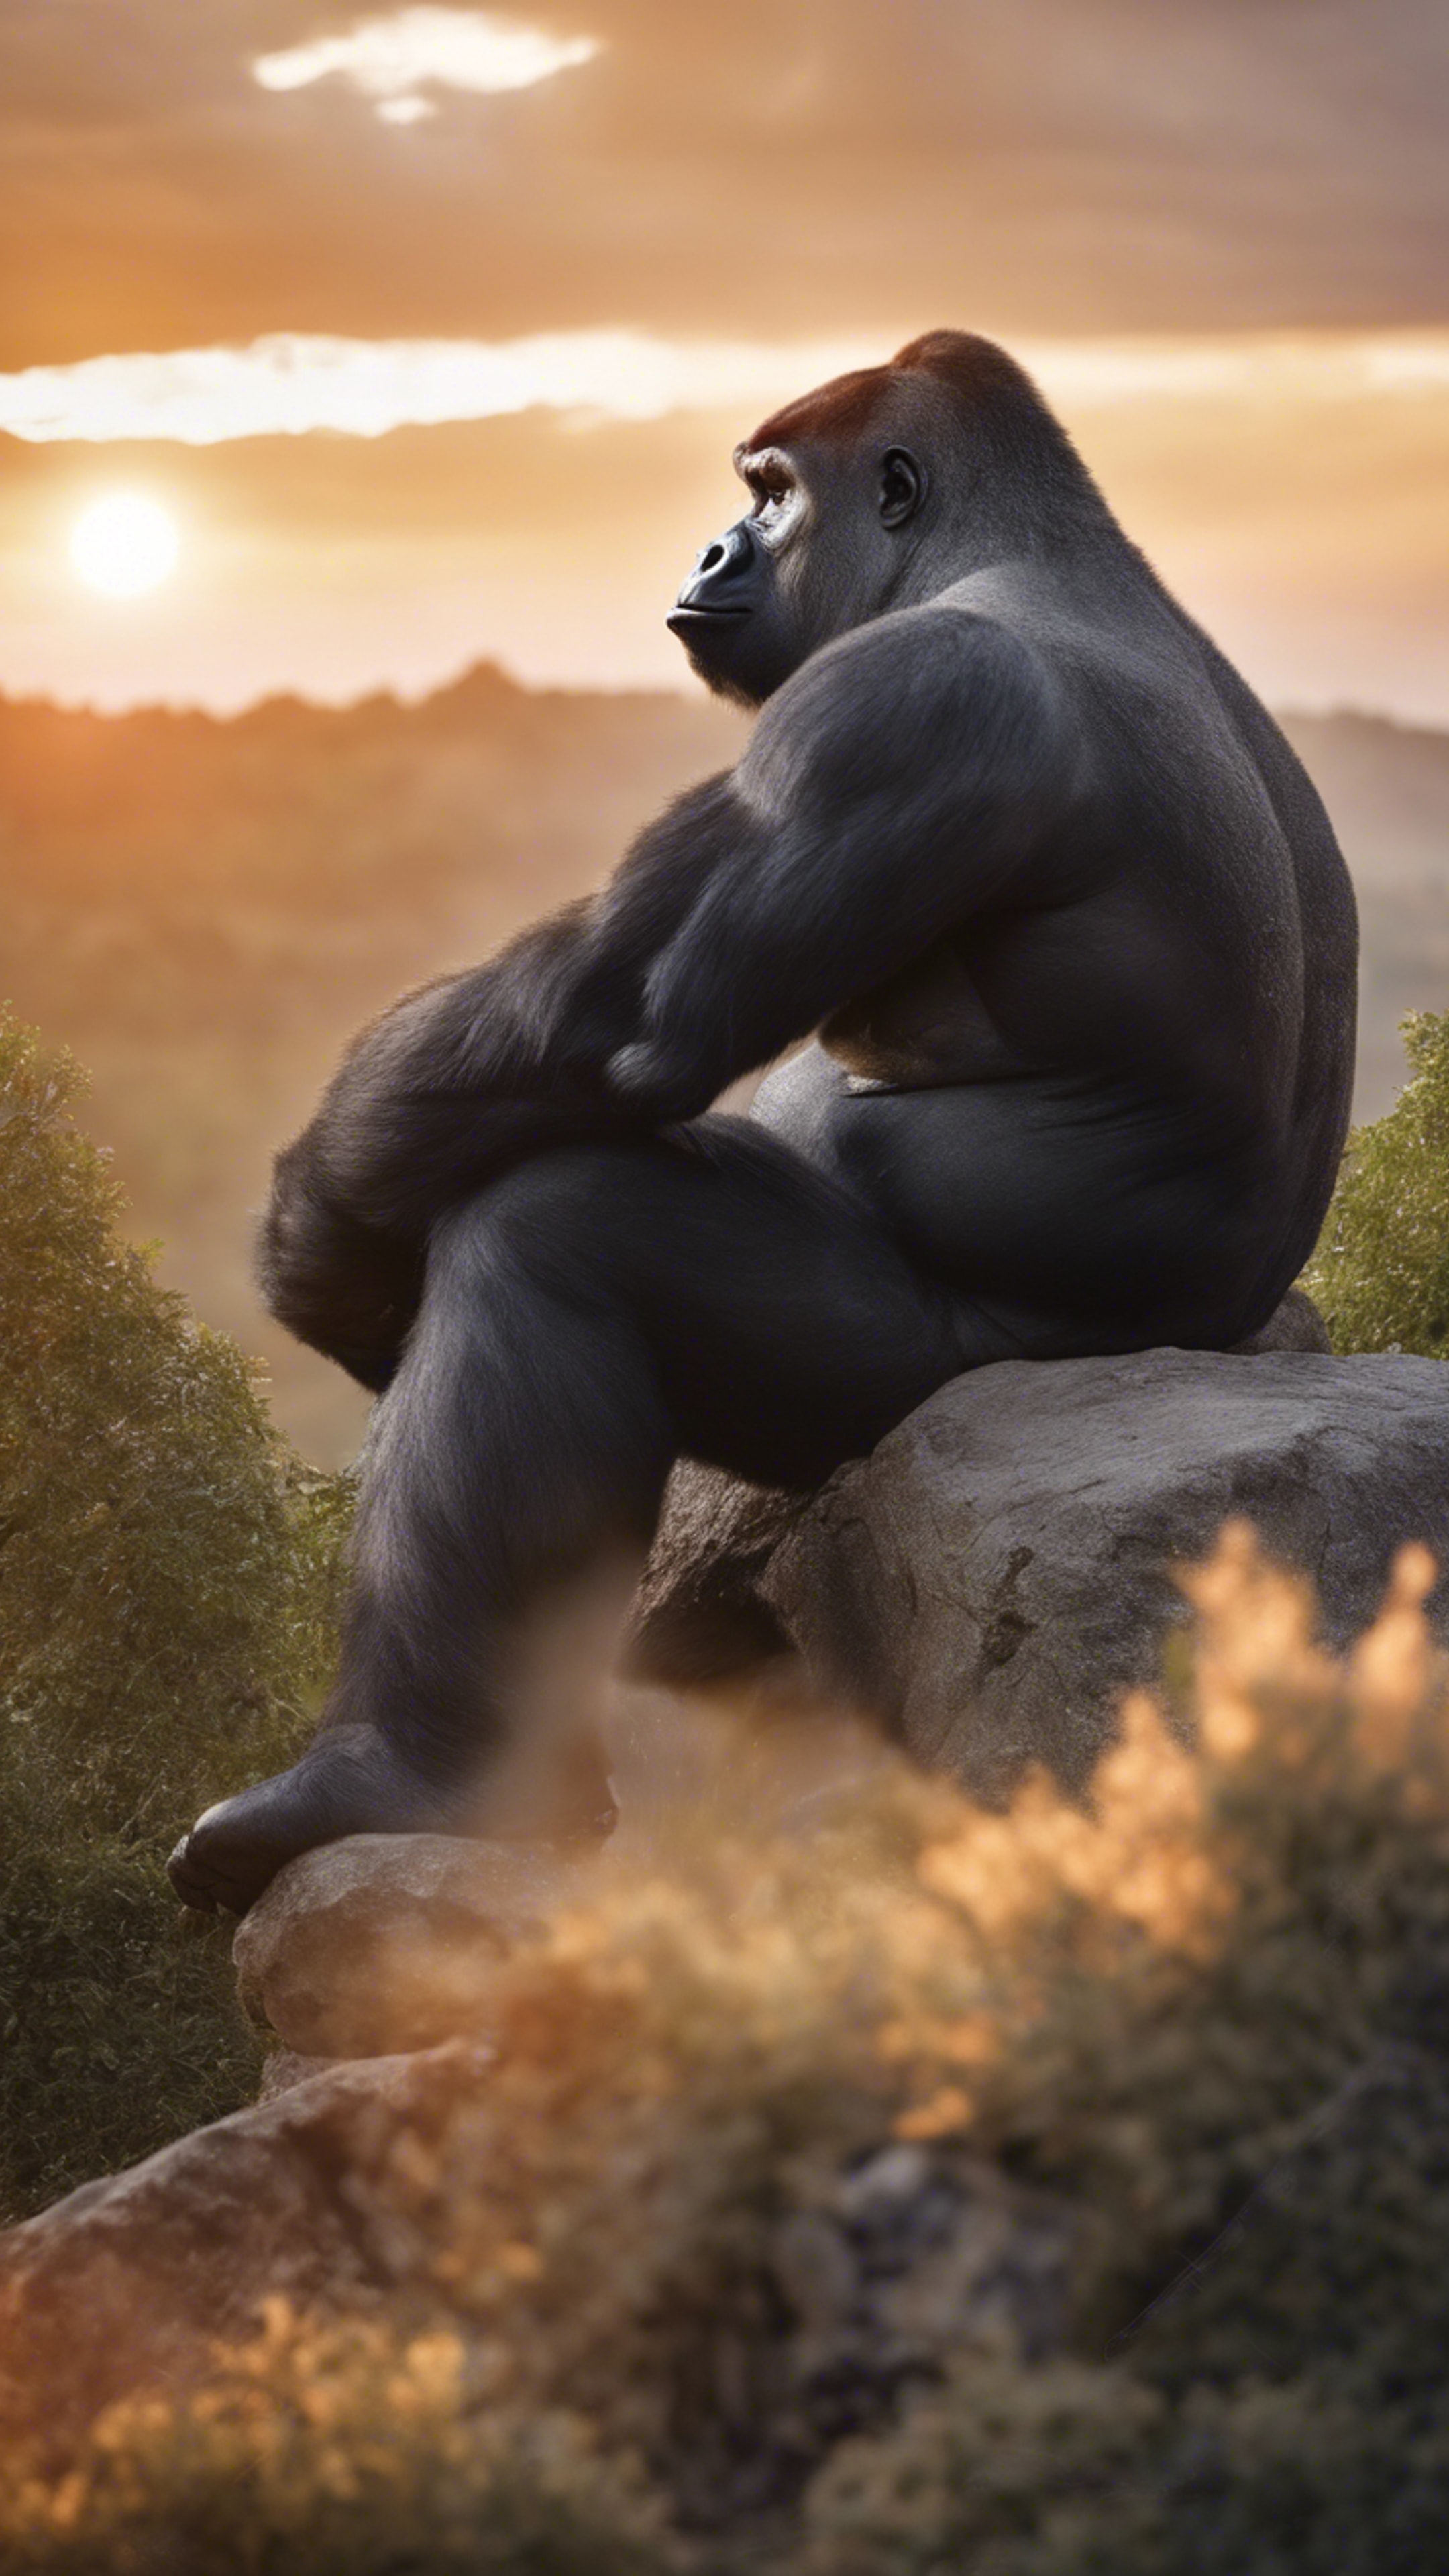 An alpha silverback gorilla majestically sitting on a rocky outcrop with a beautiful sunset backdrop. Wallpaper[c03c393cd4f24e828f4a]